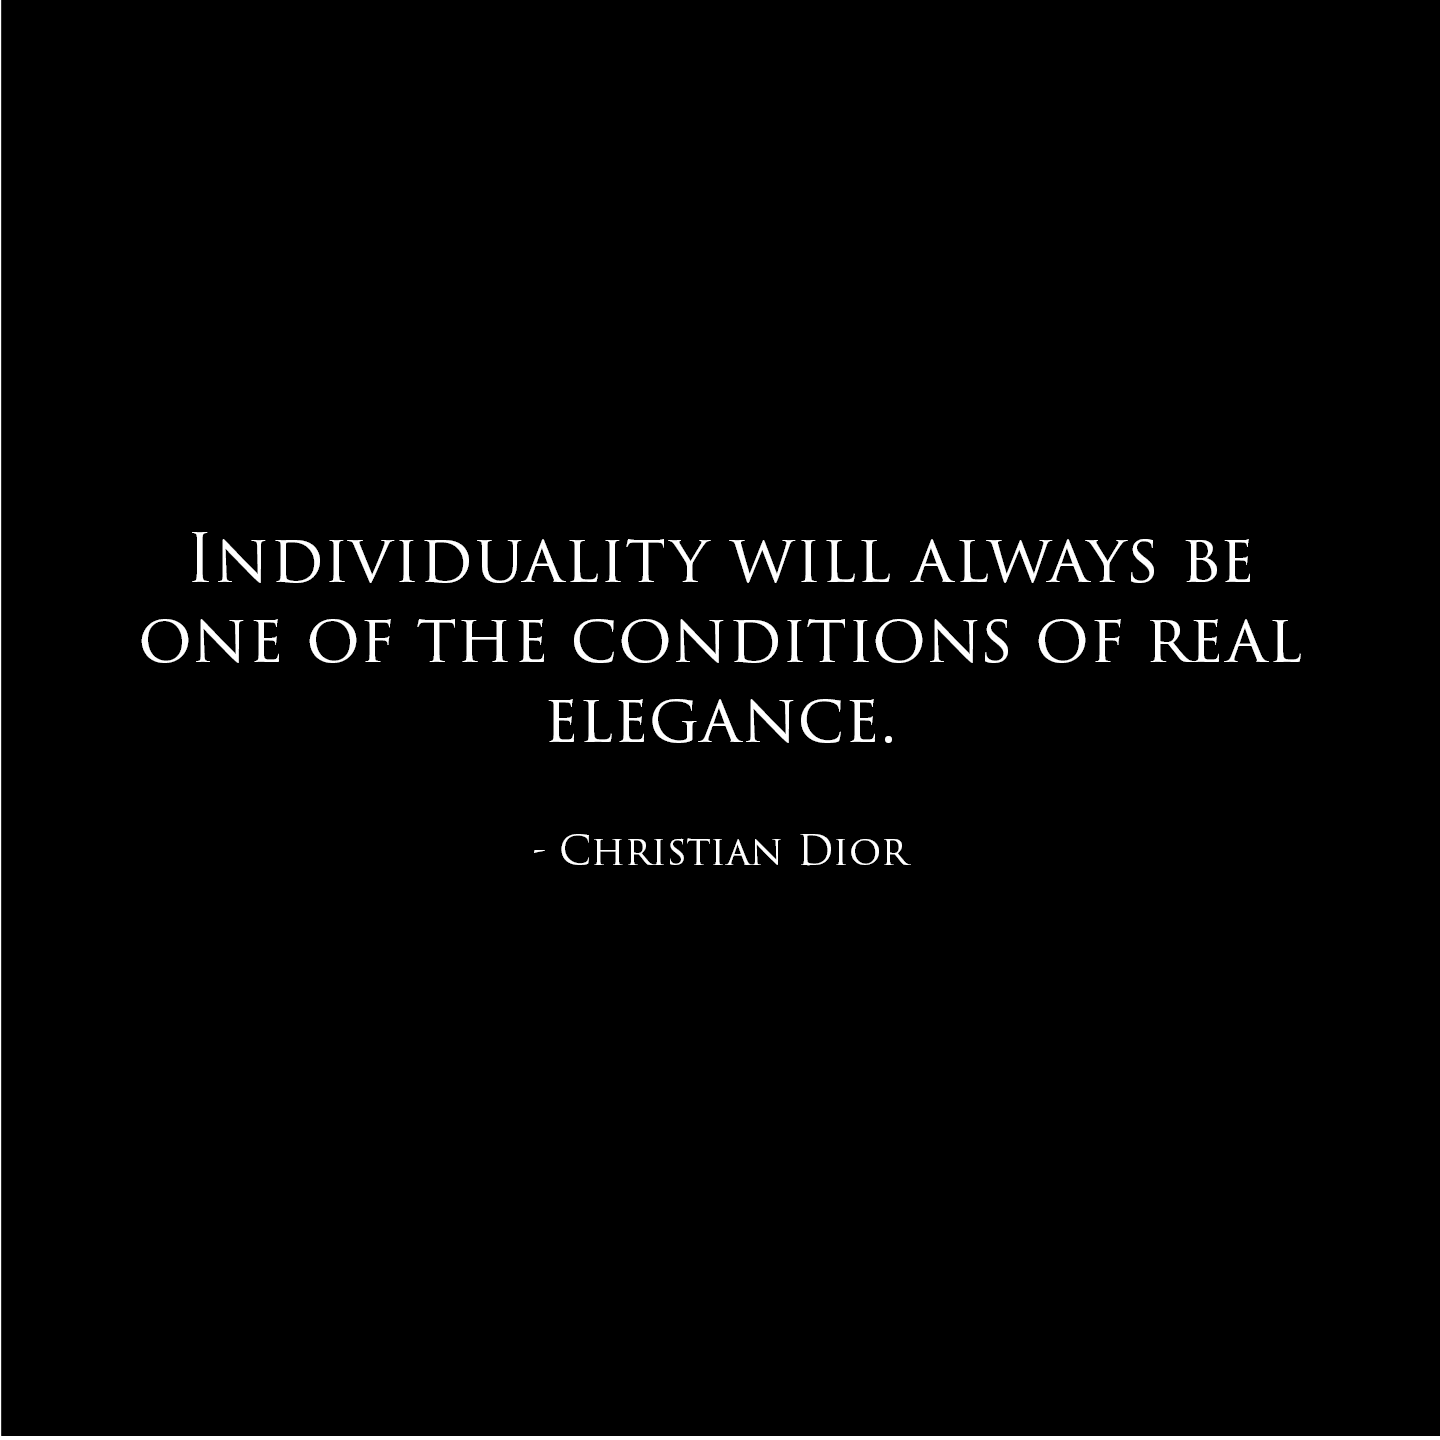 Quote_Dior.png